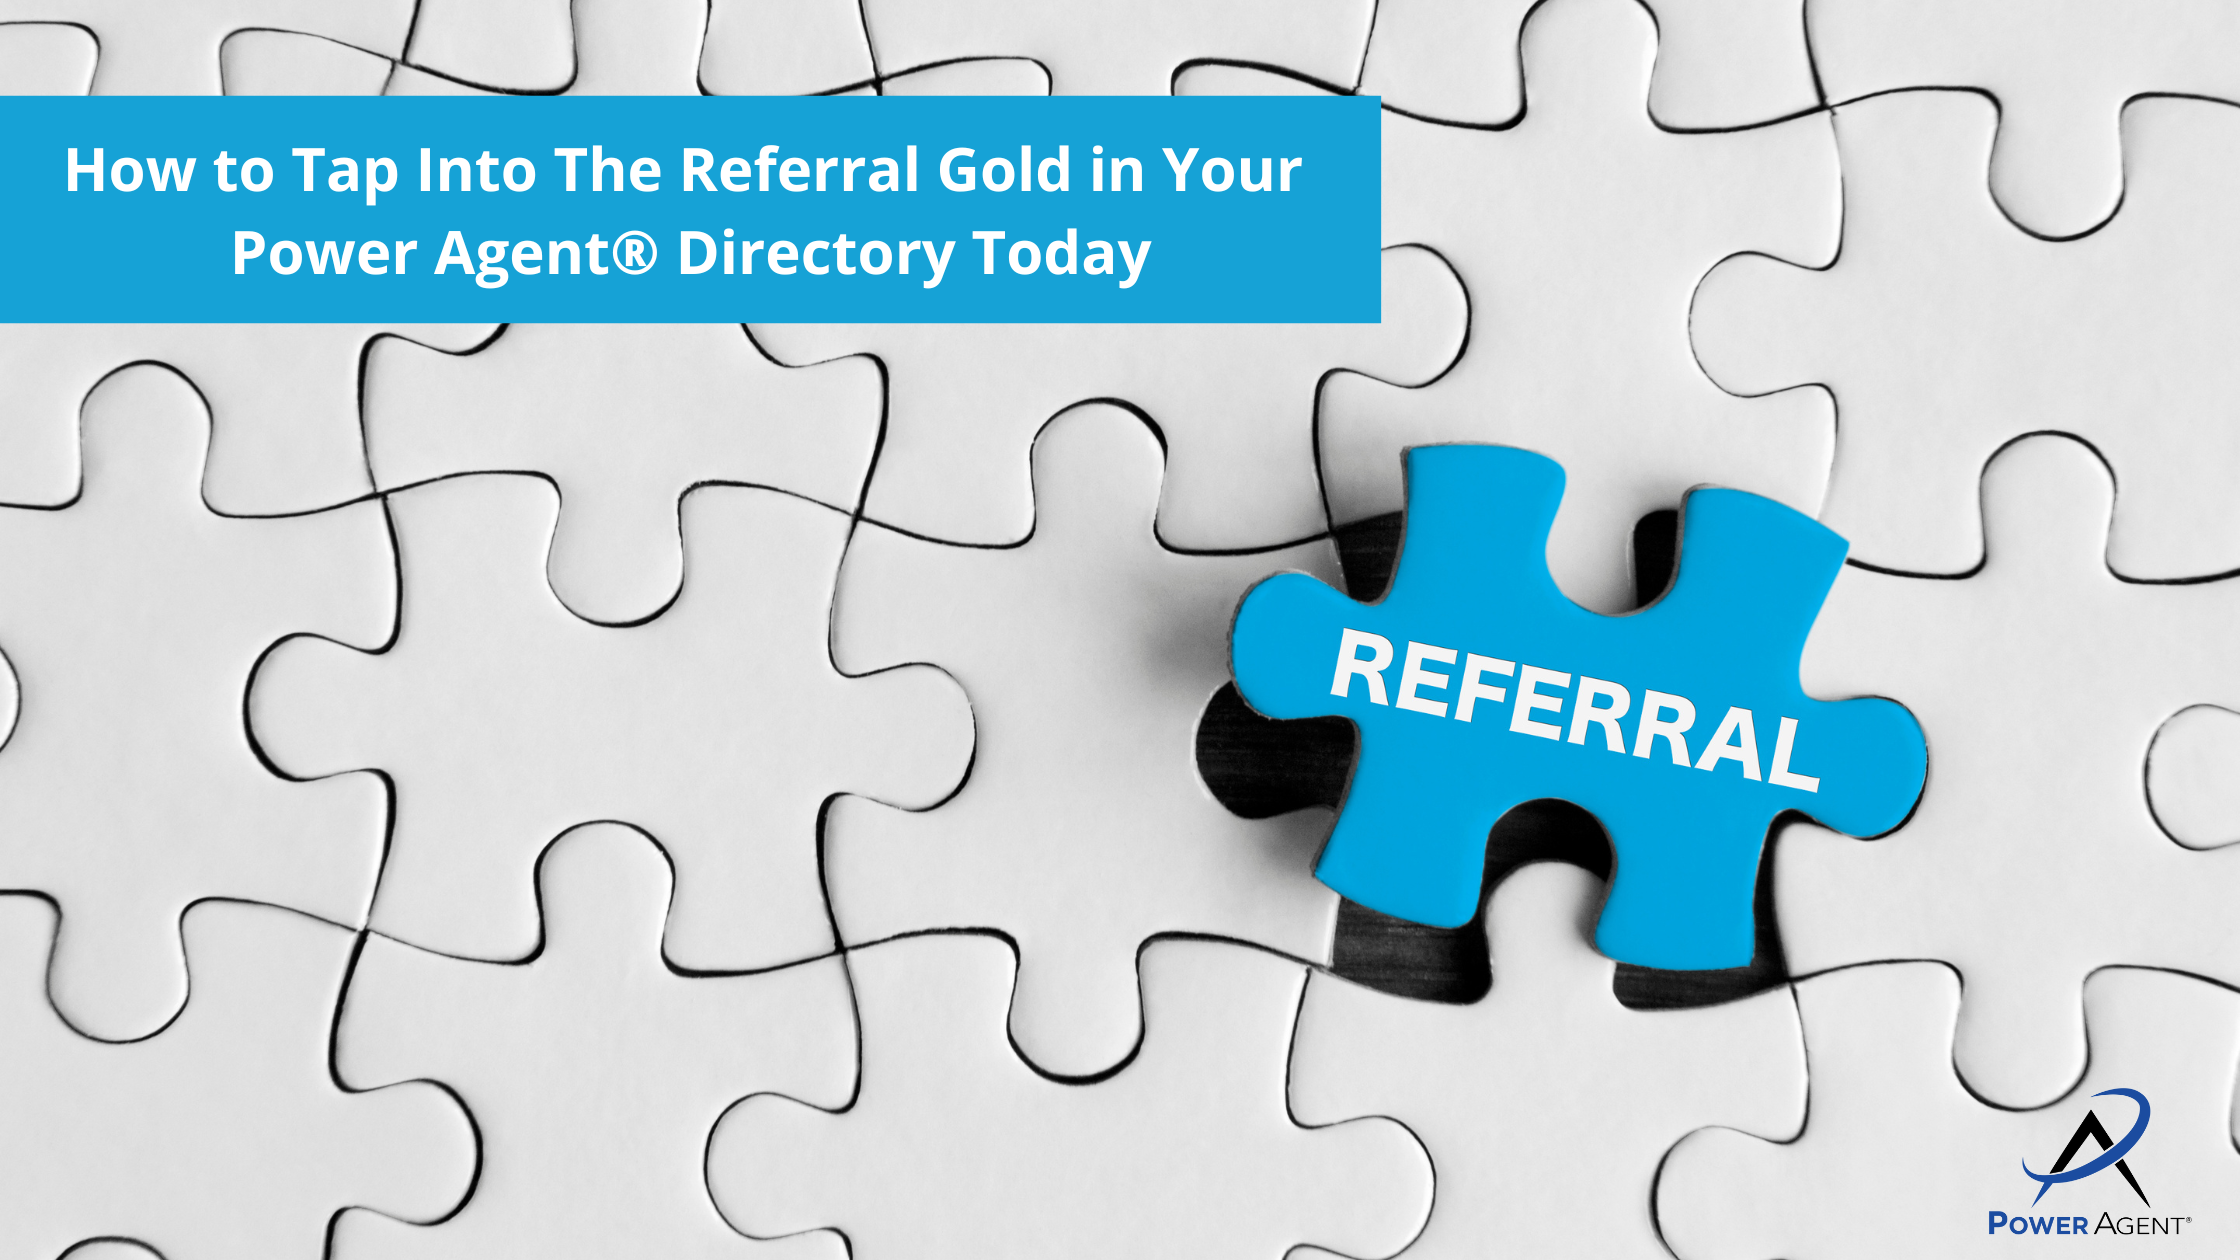 How to Tap Into The Referral Gold in Your Power Agent® Directory Today